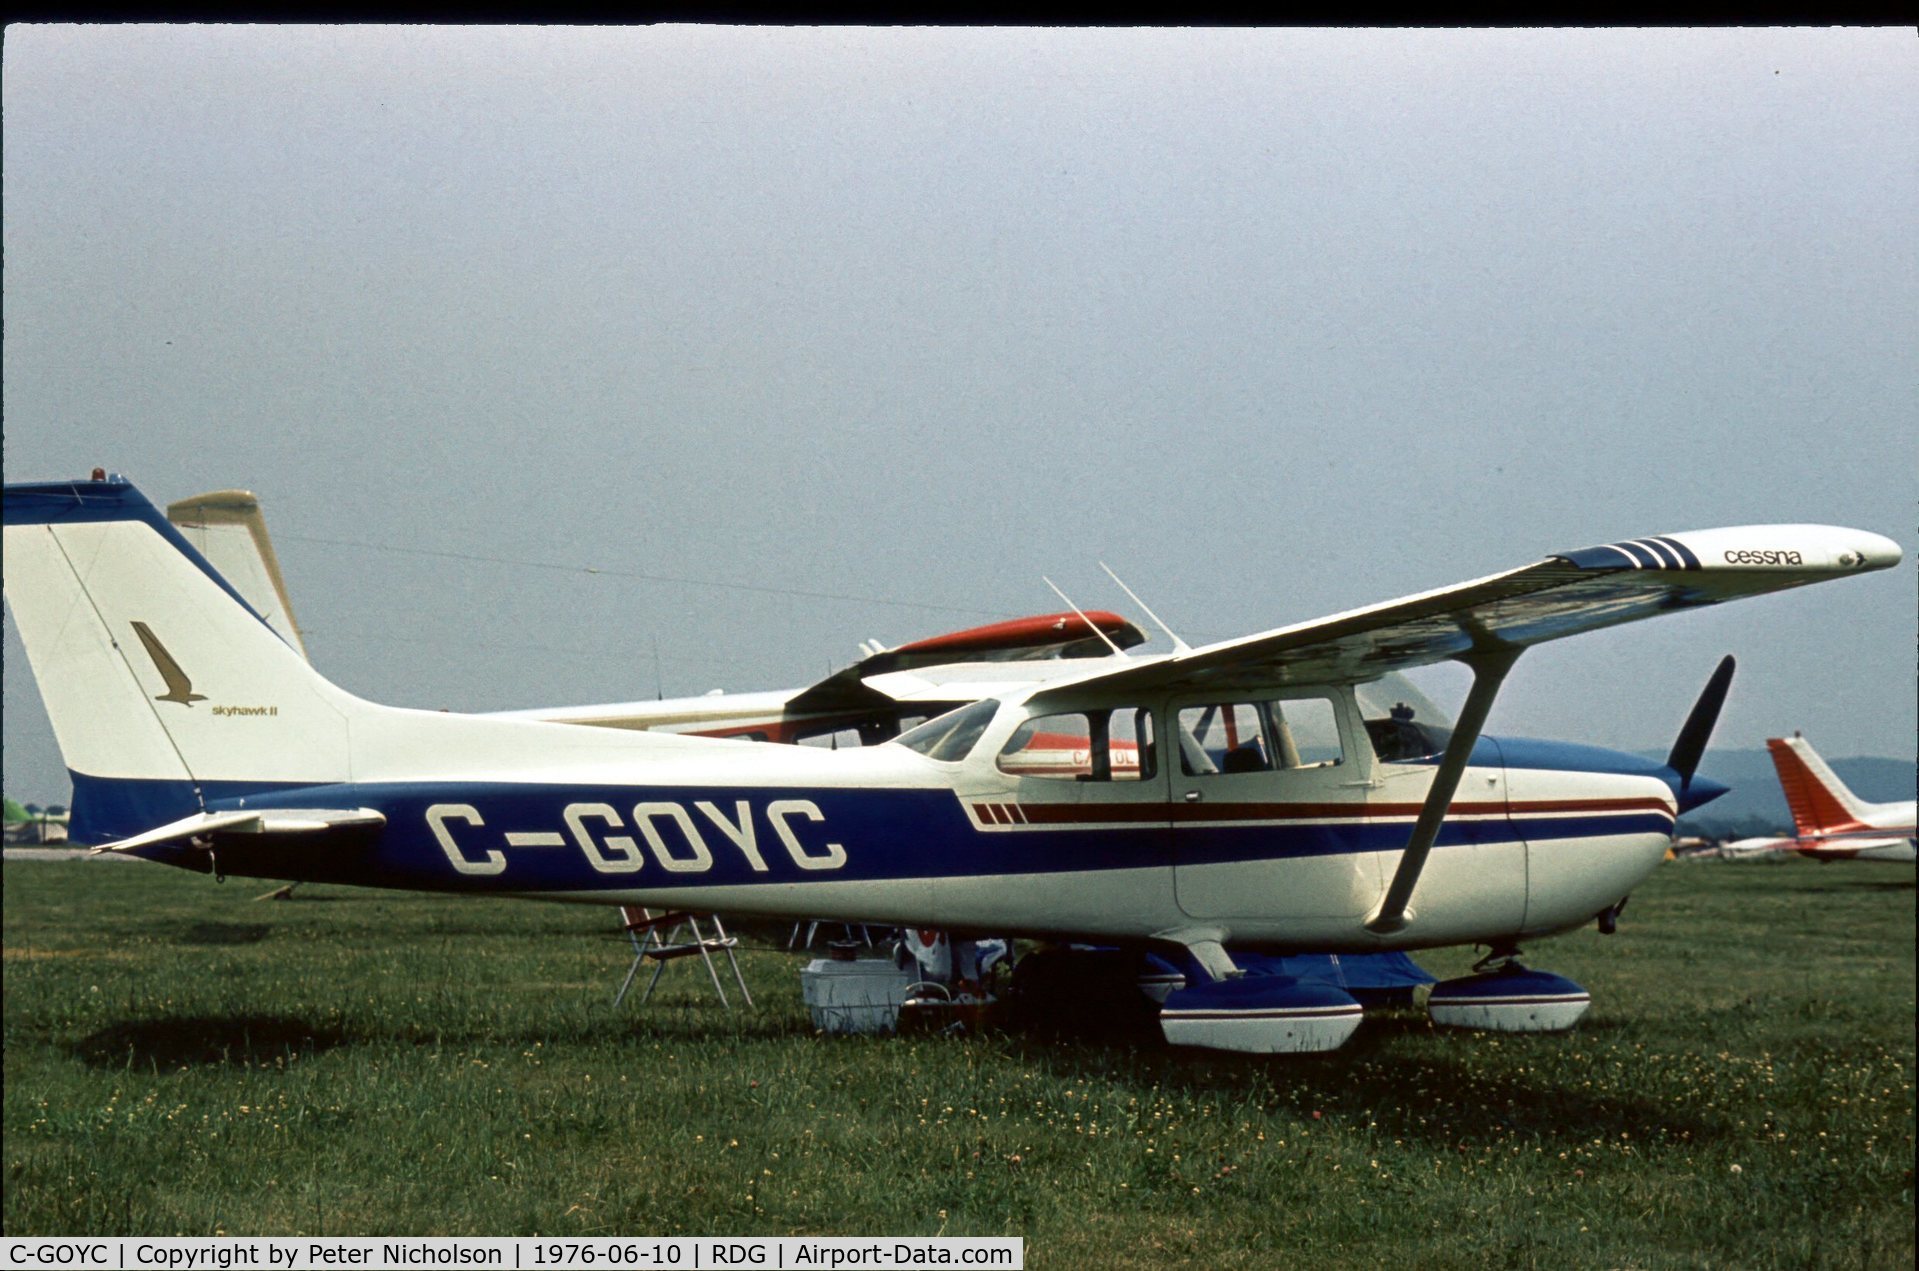 C-GOYC, 1974 Cessna 172M C/N 17264033, This Skyhawk II visited the Reading Airshow, Pennslyvania in 1976.